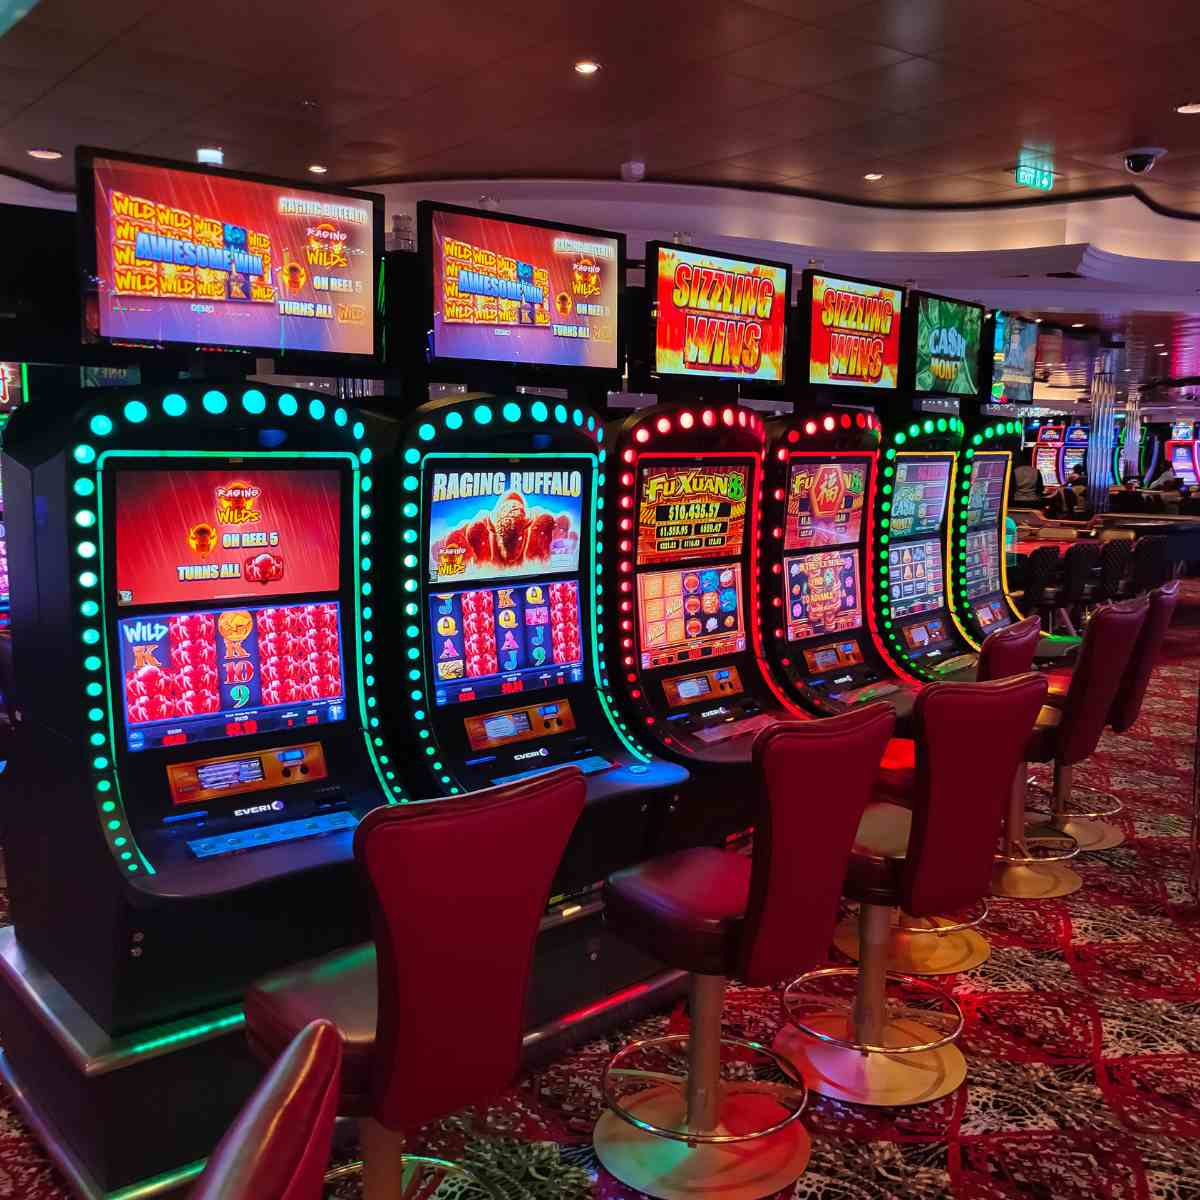 Miami, USA - April 29, 2022: Casino interior, gaming slot machines, American gambling at Symphony of the seas is the biggest cruise ship at Miami, USA on April 29, 2022 